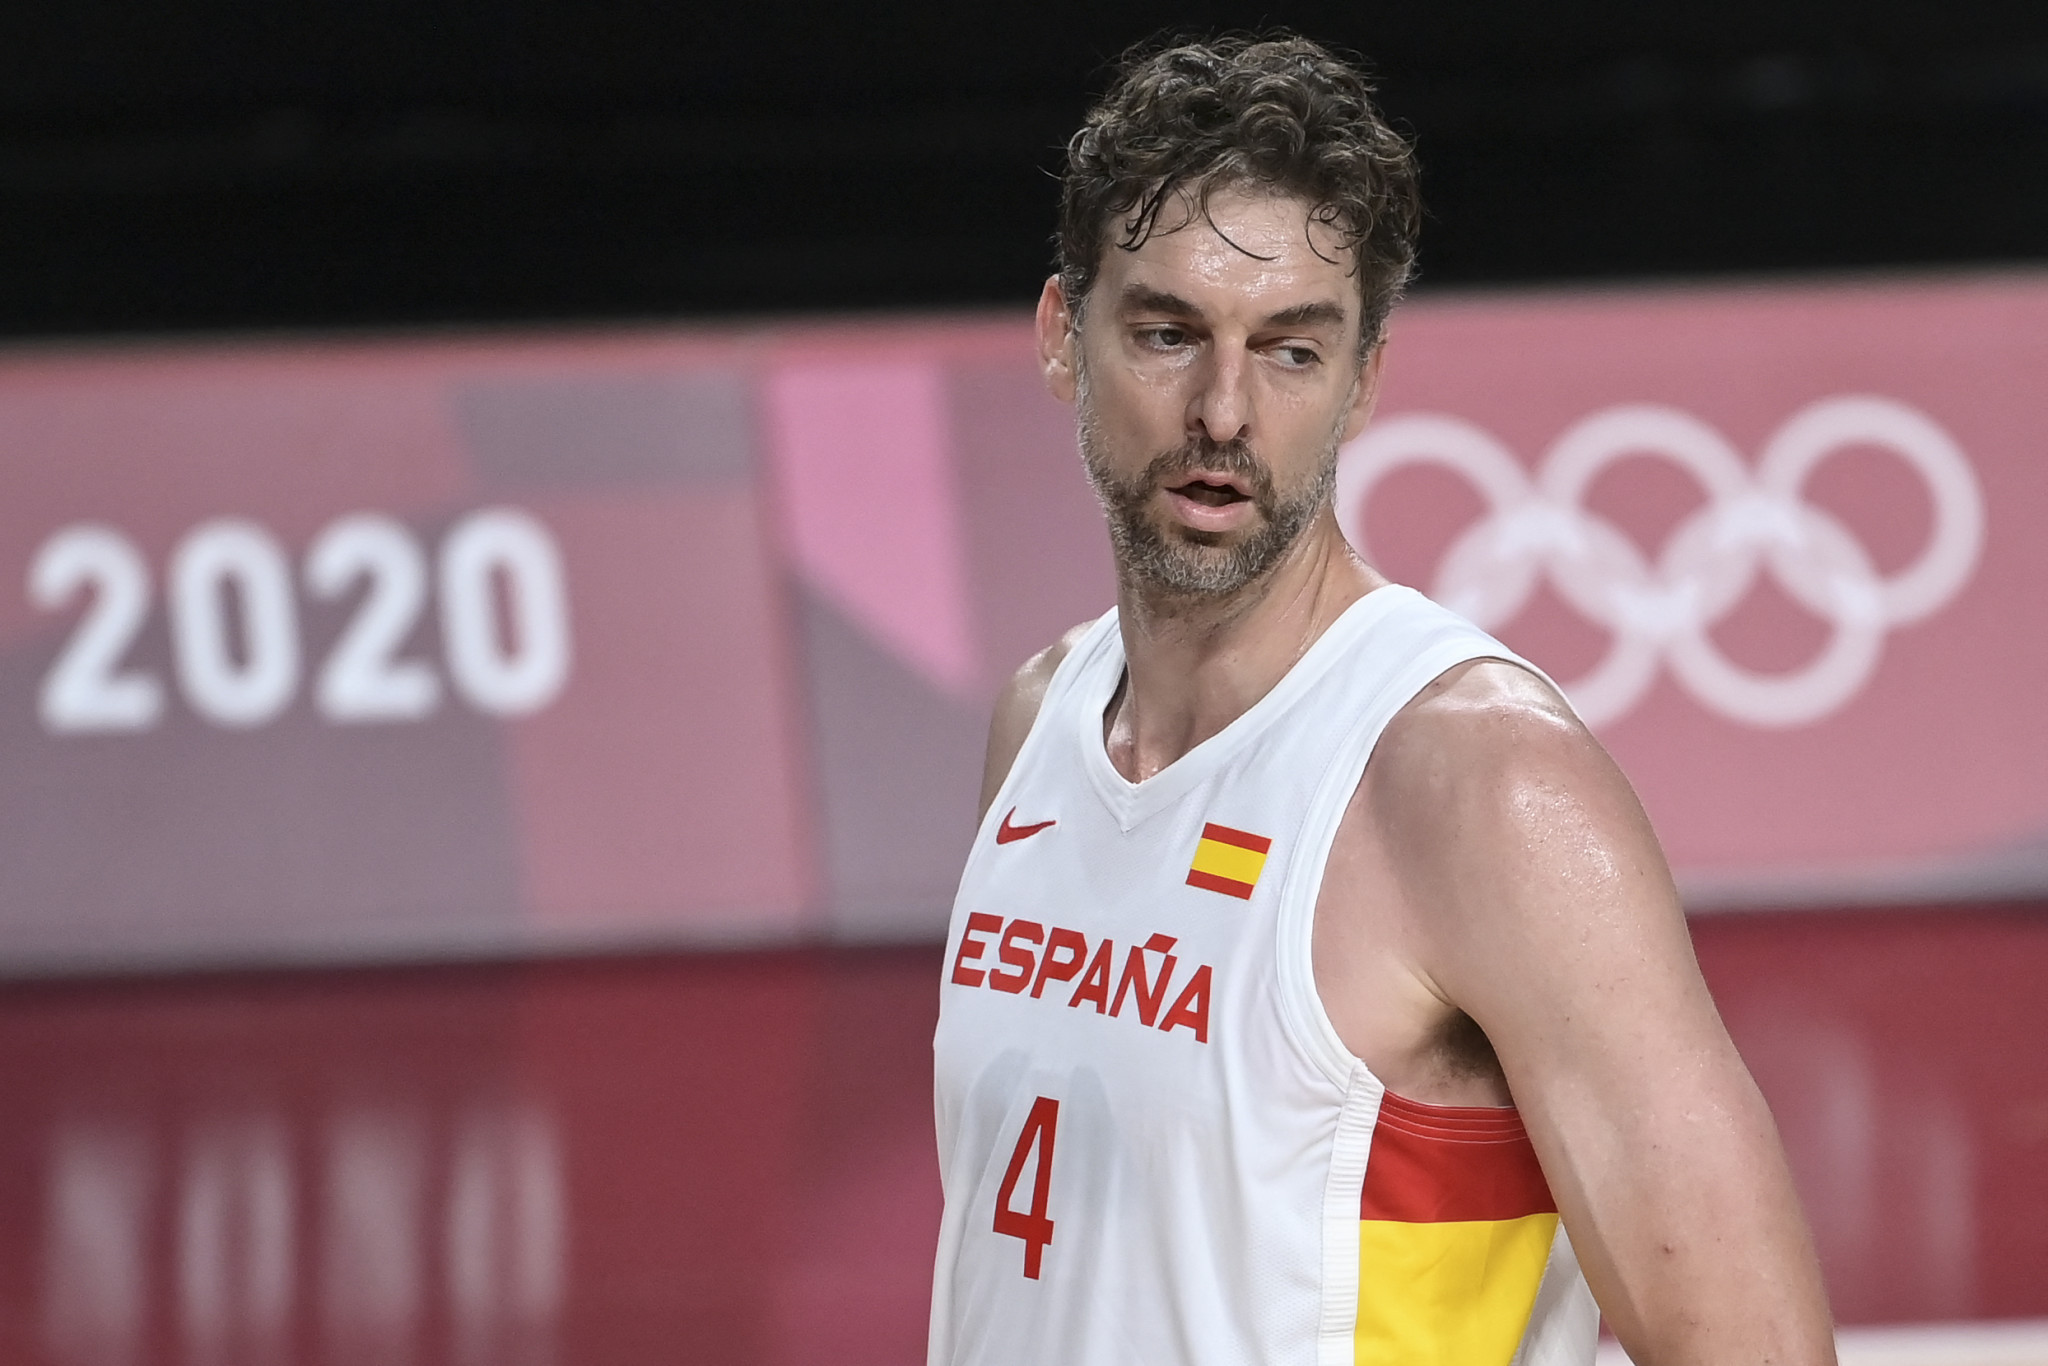 Pau Gasol won four gold medals during his international career with Spain ©Getty Images